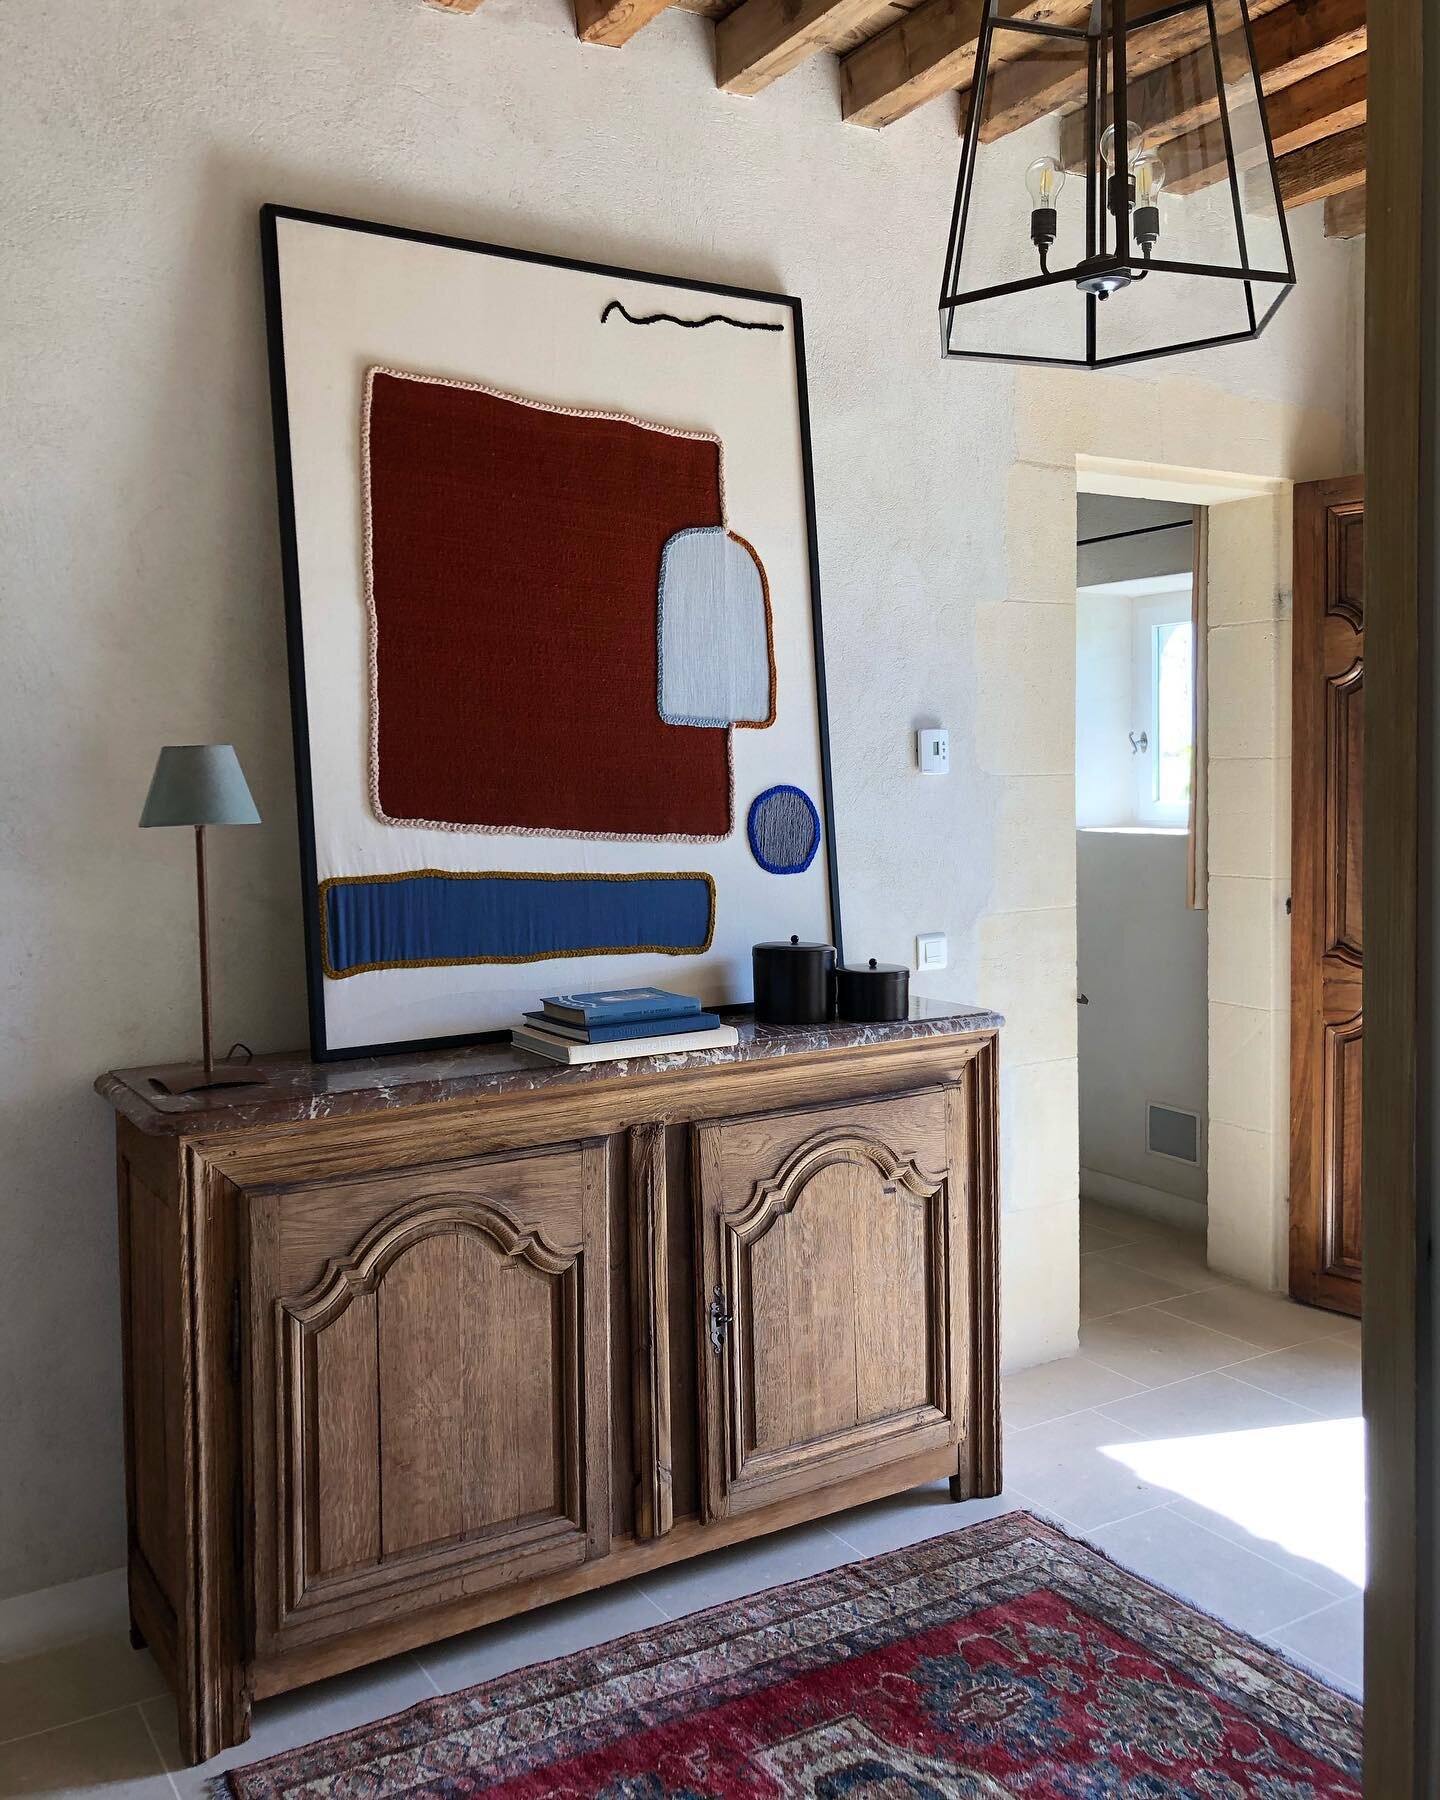 Enjoyed dressing this French entrance with a mix of contemporary and antique designs. Feeling a lot of love for textile art. Interiors @schillerbeynoninteriors #sourcingantiques #contemporaryart #interiordesign #provenceinteriors #hallwayinspo #texti